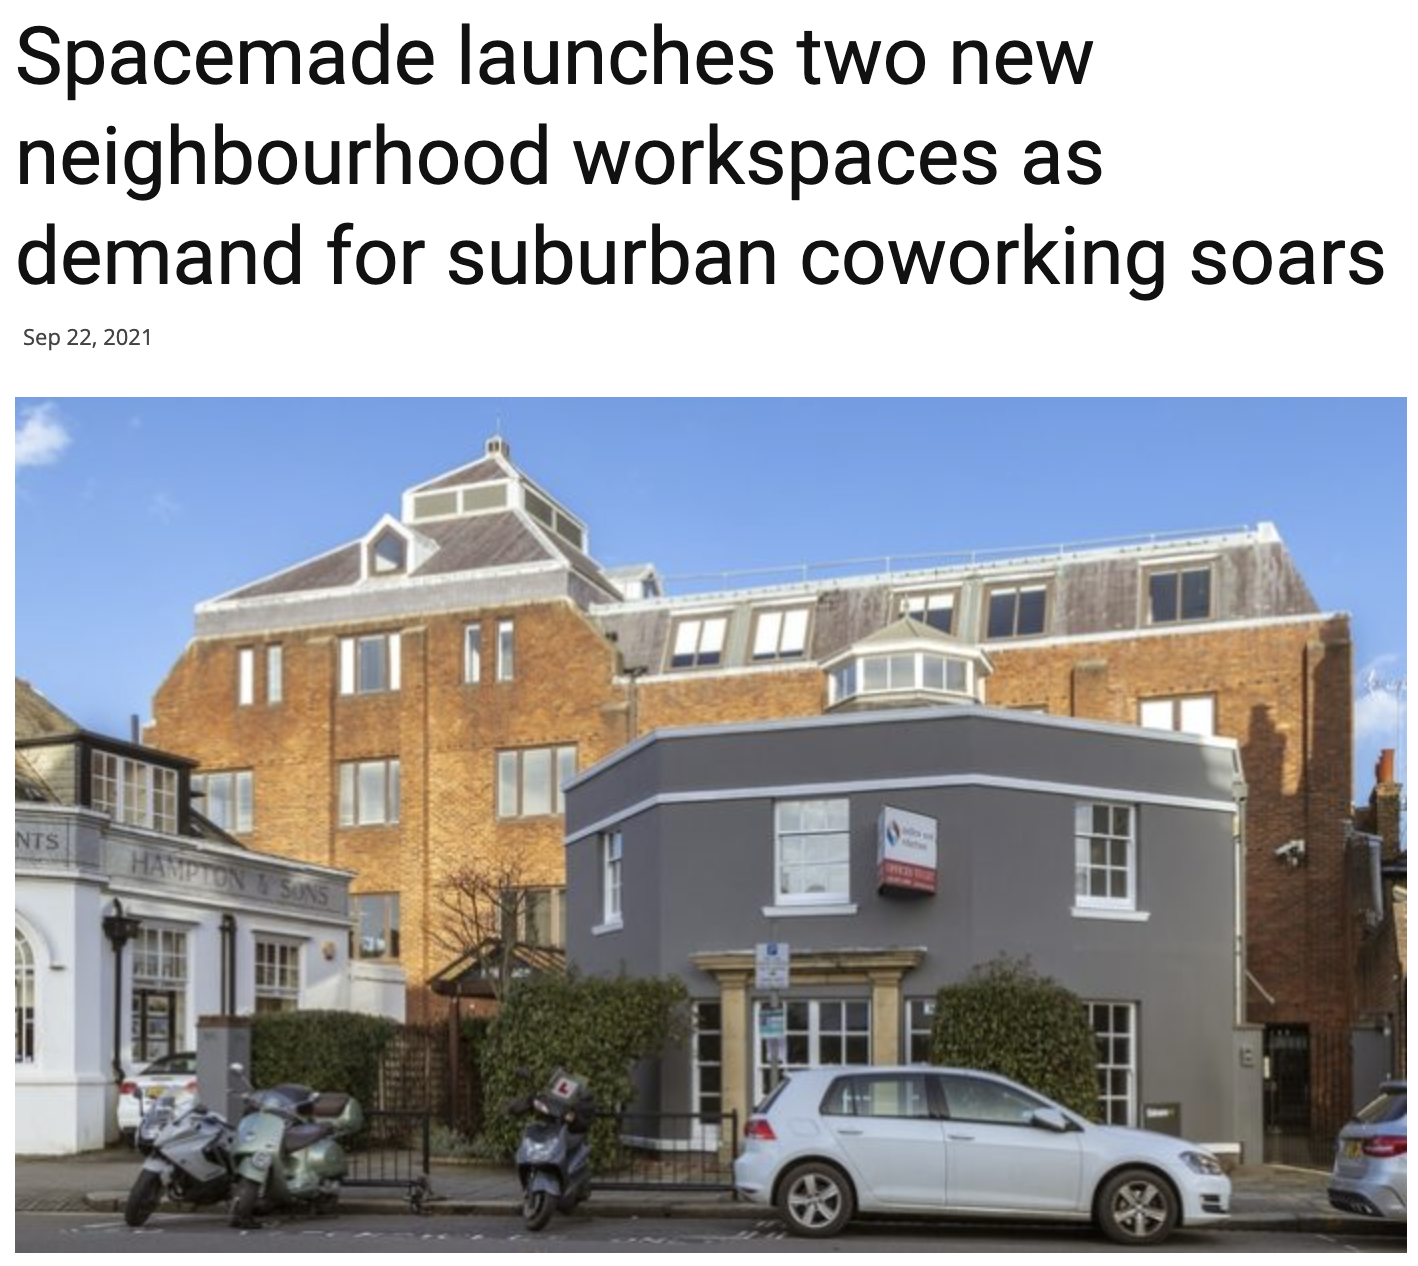 Press: Spacemade Launches Two New Neighbourhood Workspaces as Demand for Suburban Coworking Soars – Commercial News Media